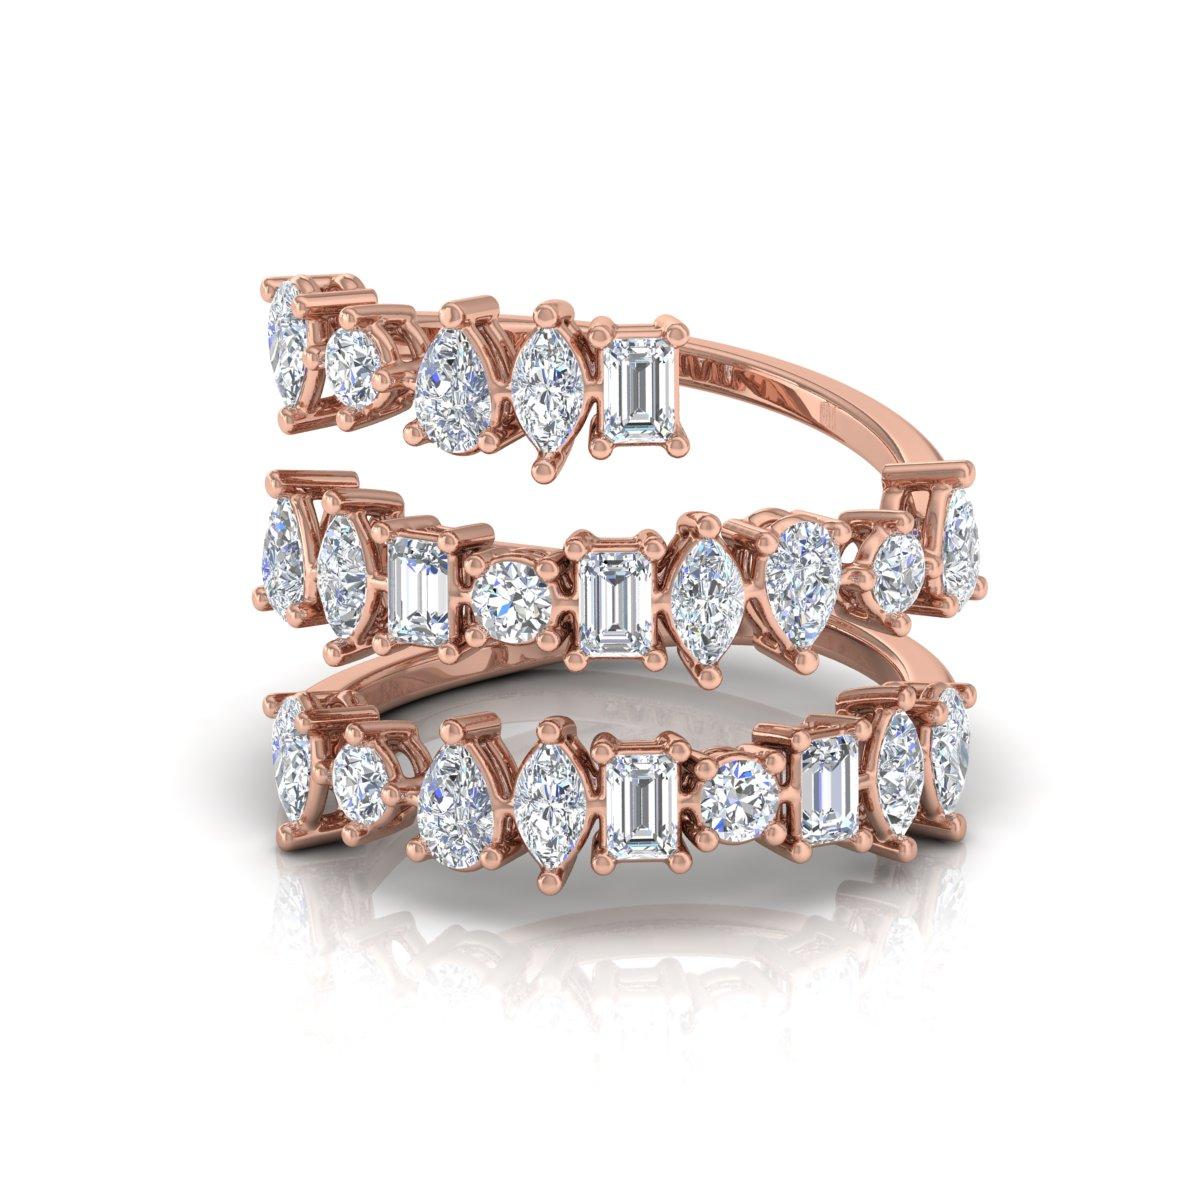 For Sale:  2.70 Carat Pear Baguette Diamond Wrap Ring Solid 18k Rose Gold Handmade Jewelry 6